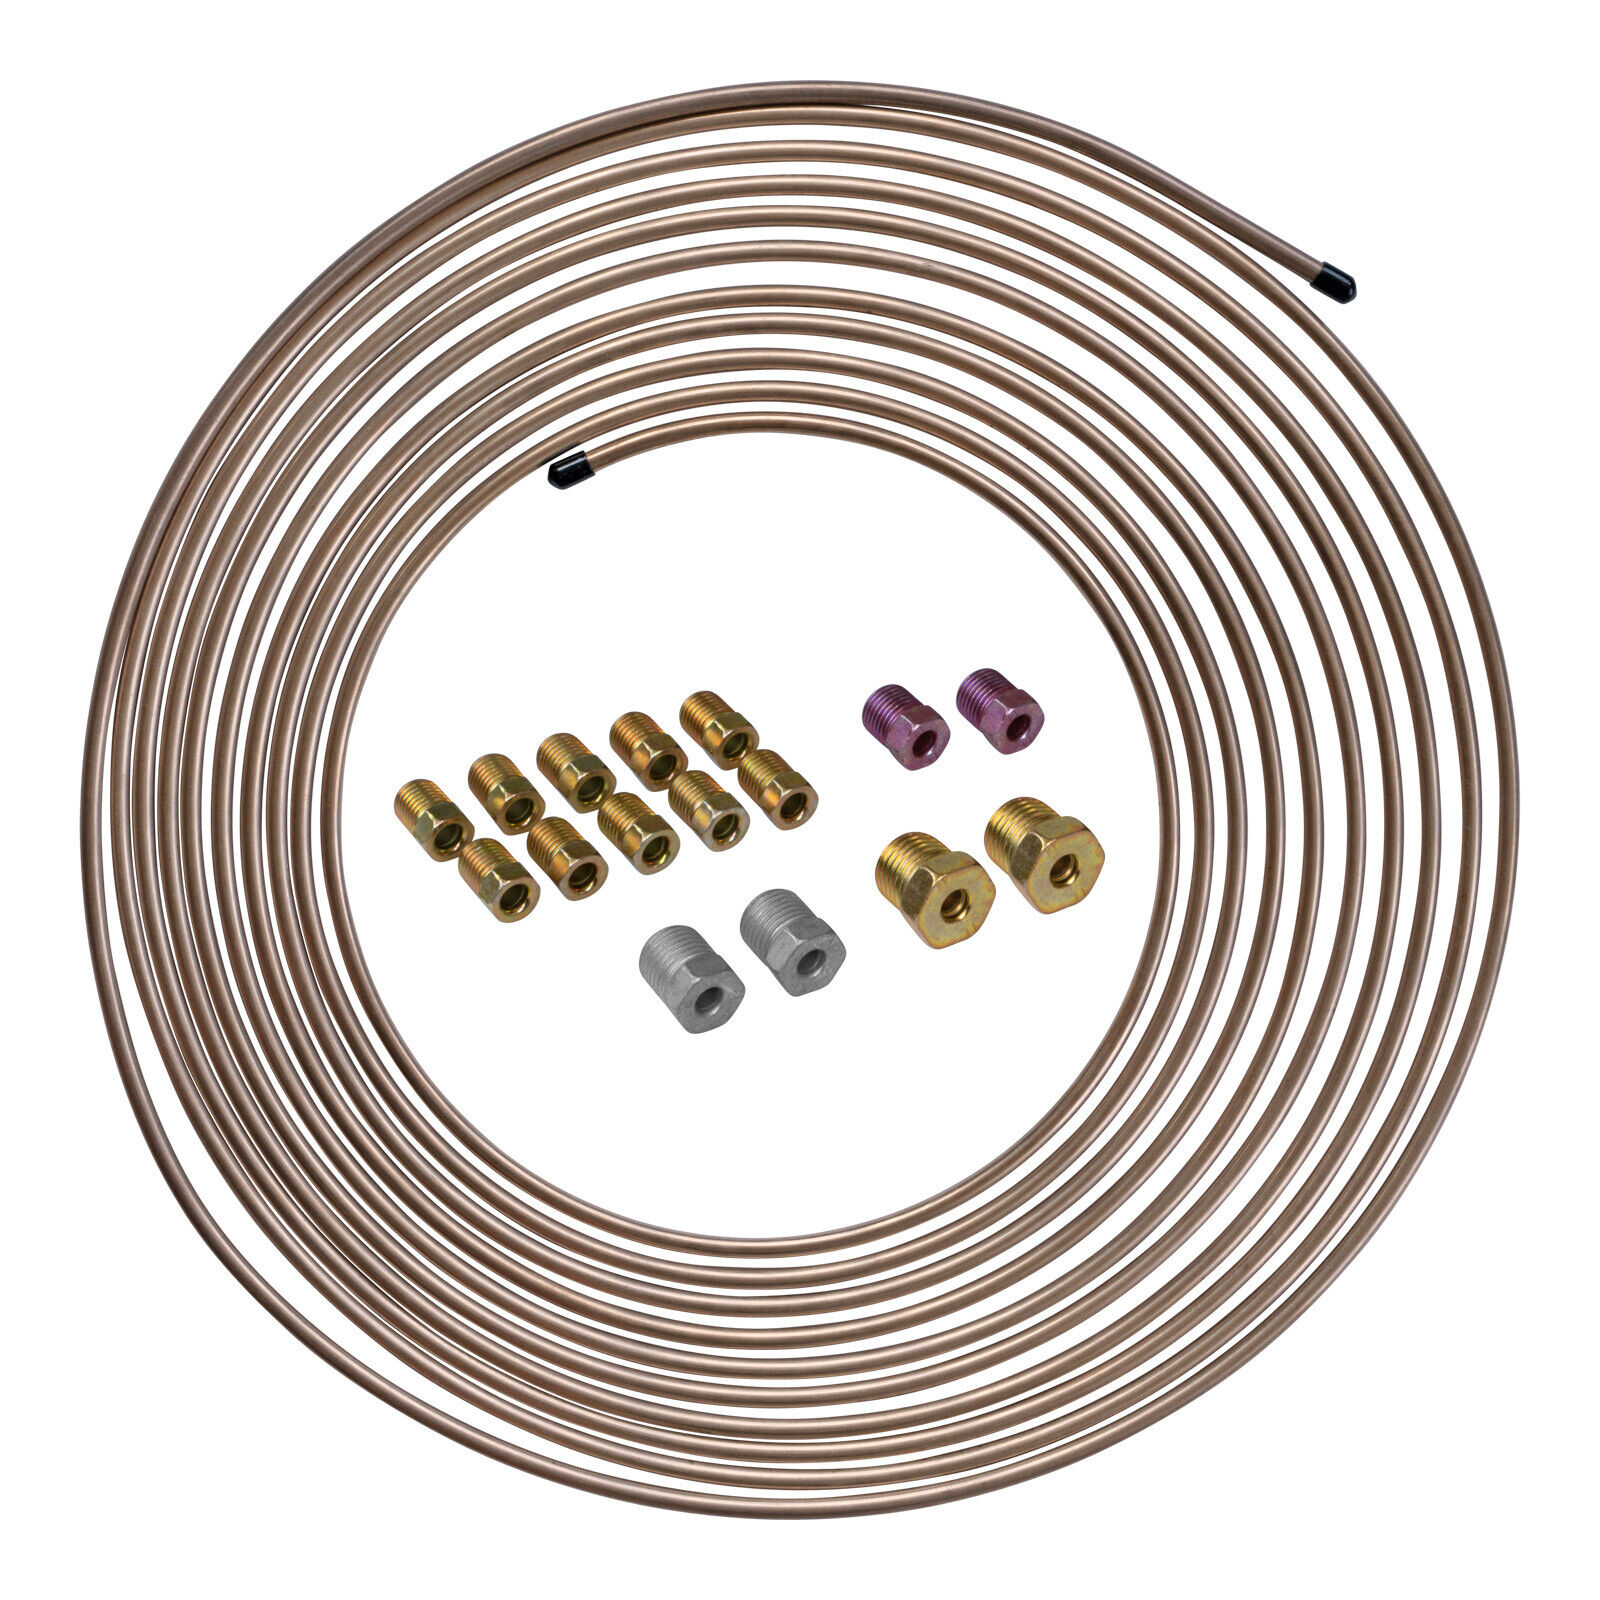 25 ft 3/16 Copper-Nickel Brake Line Tubing Coil and Fitting Kit, SAE Inverted